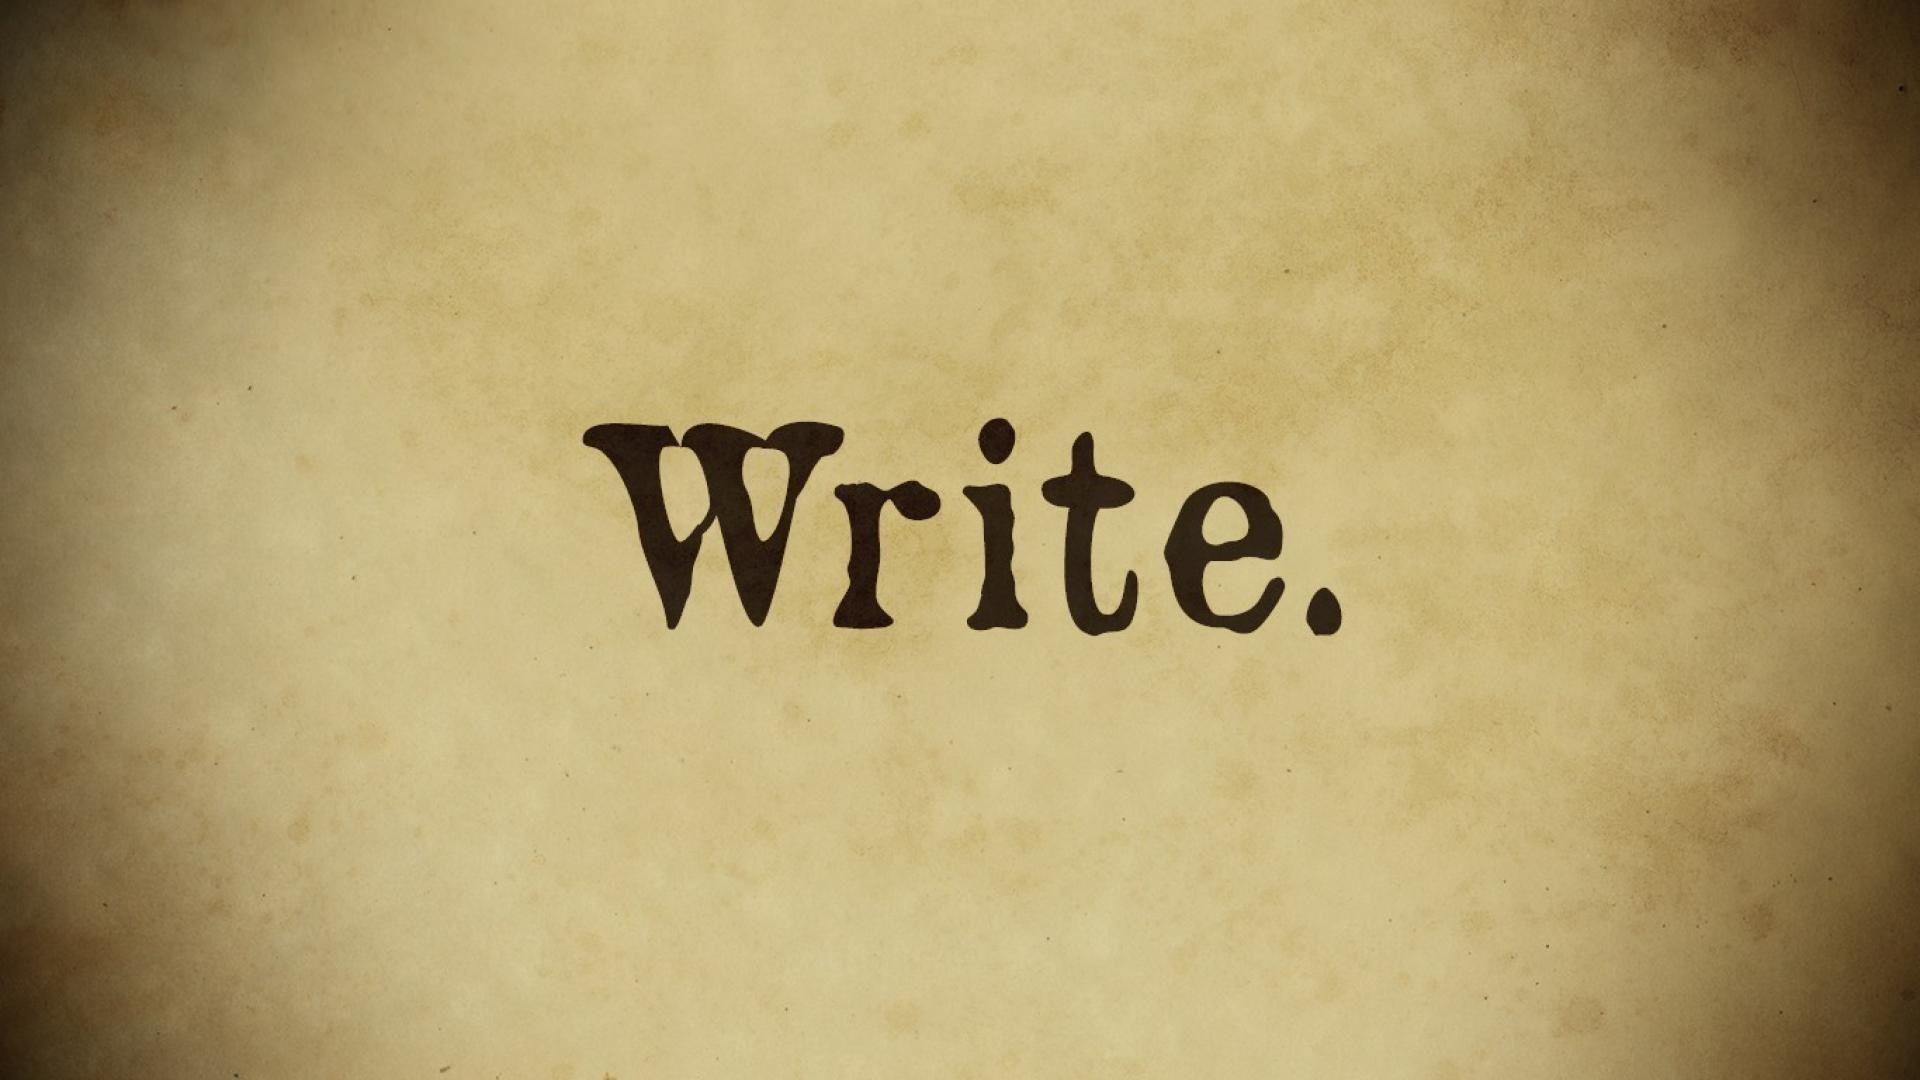 Wallpaper with Writing